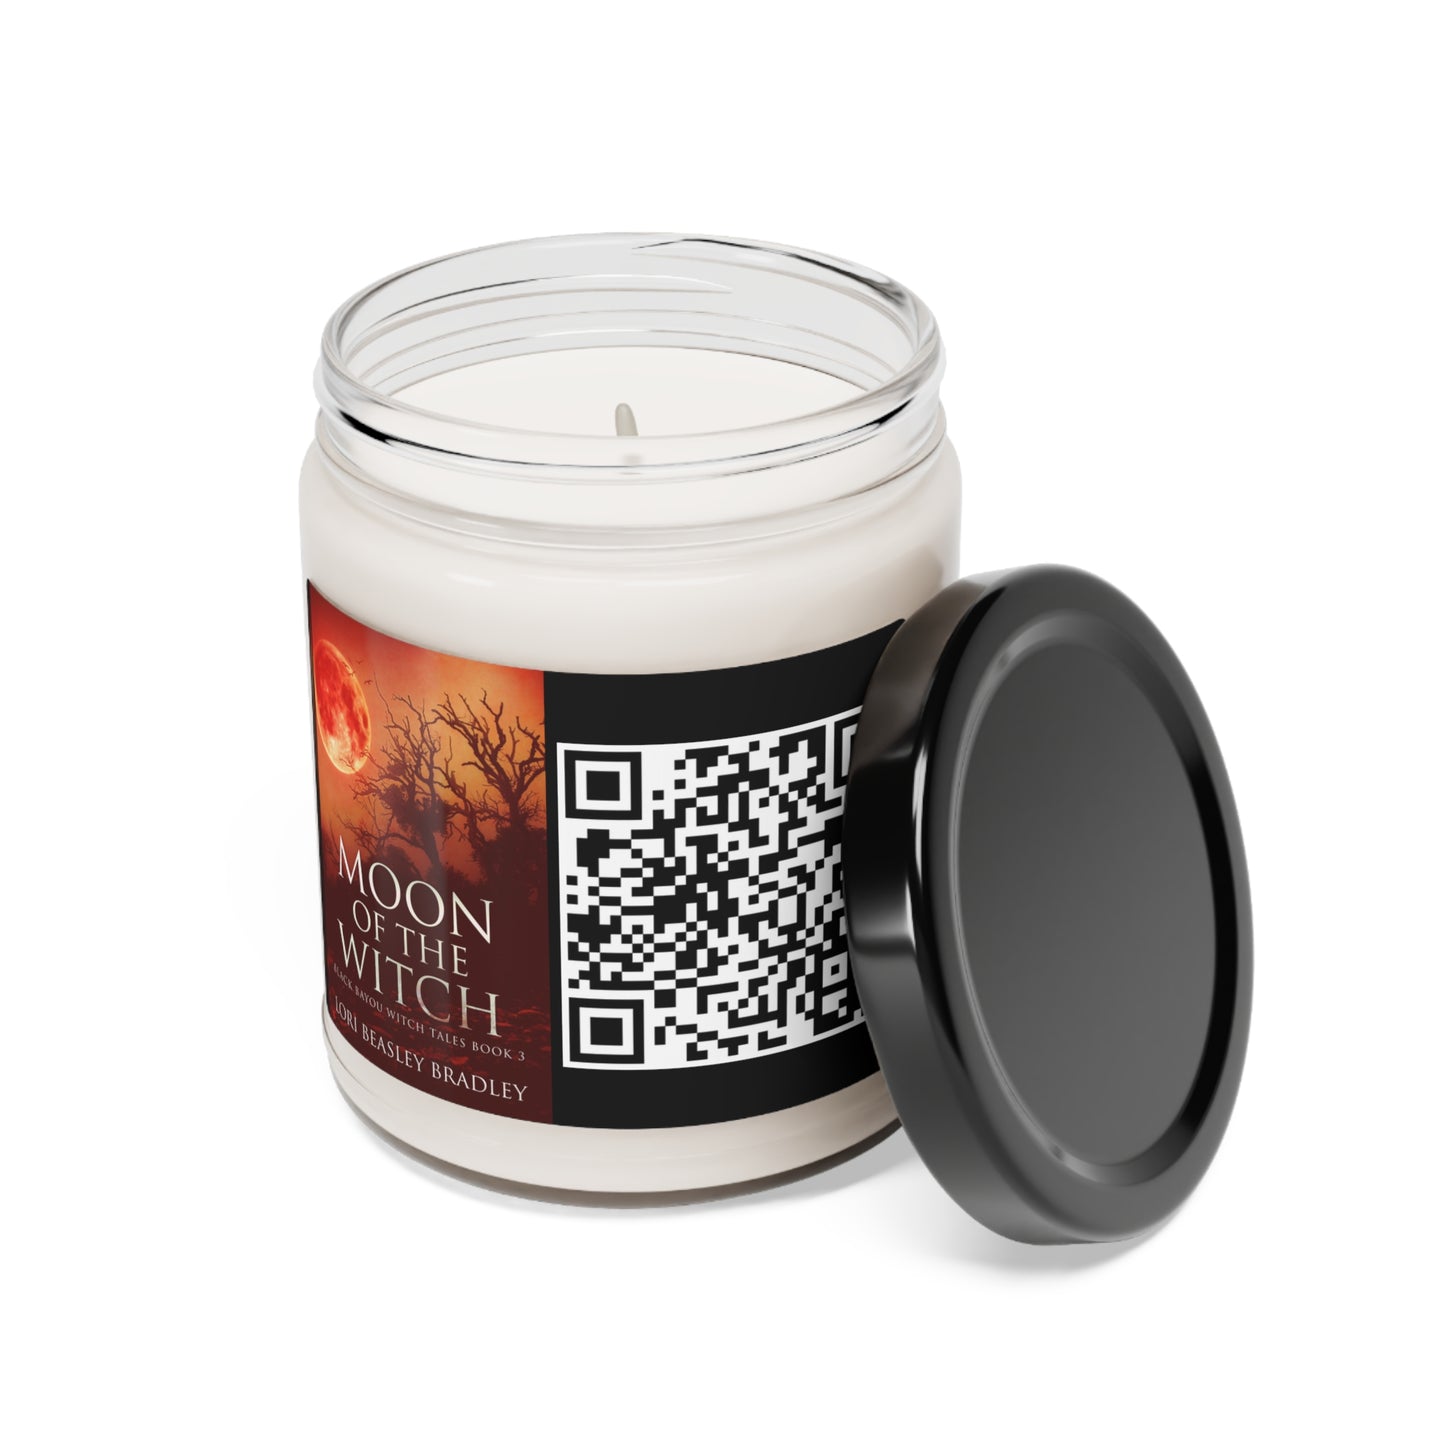 Moon Of The Witch - Scented Soy Candle